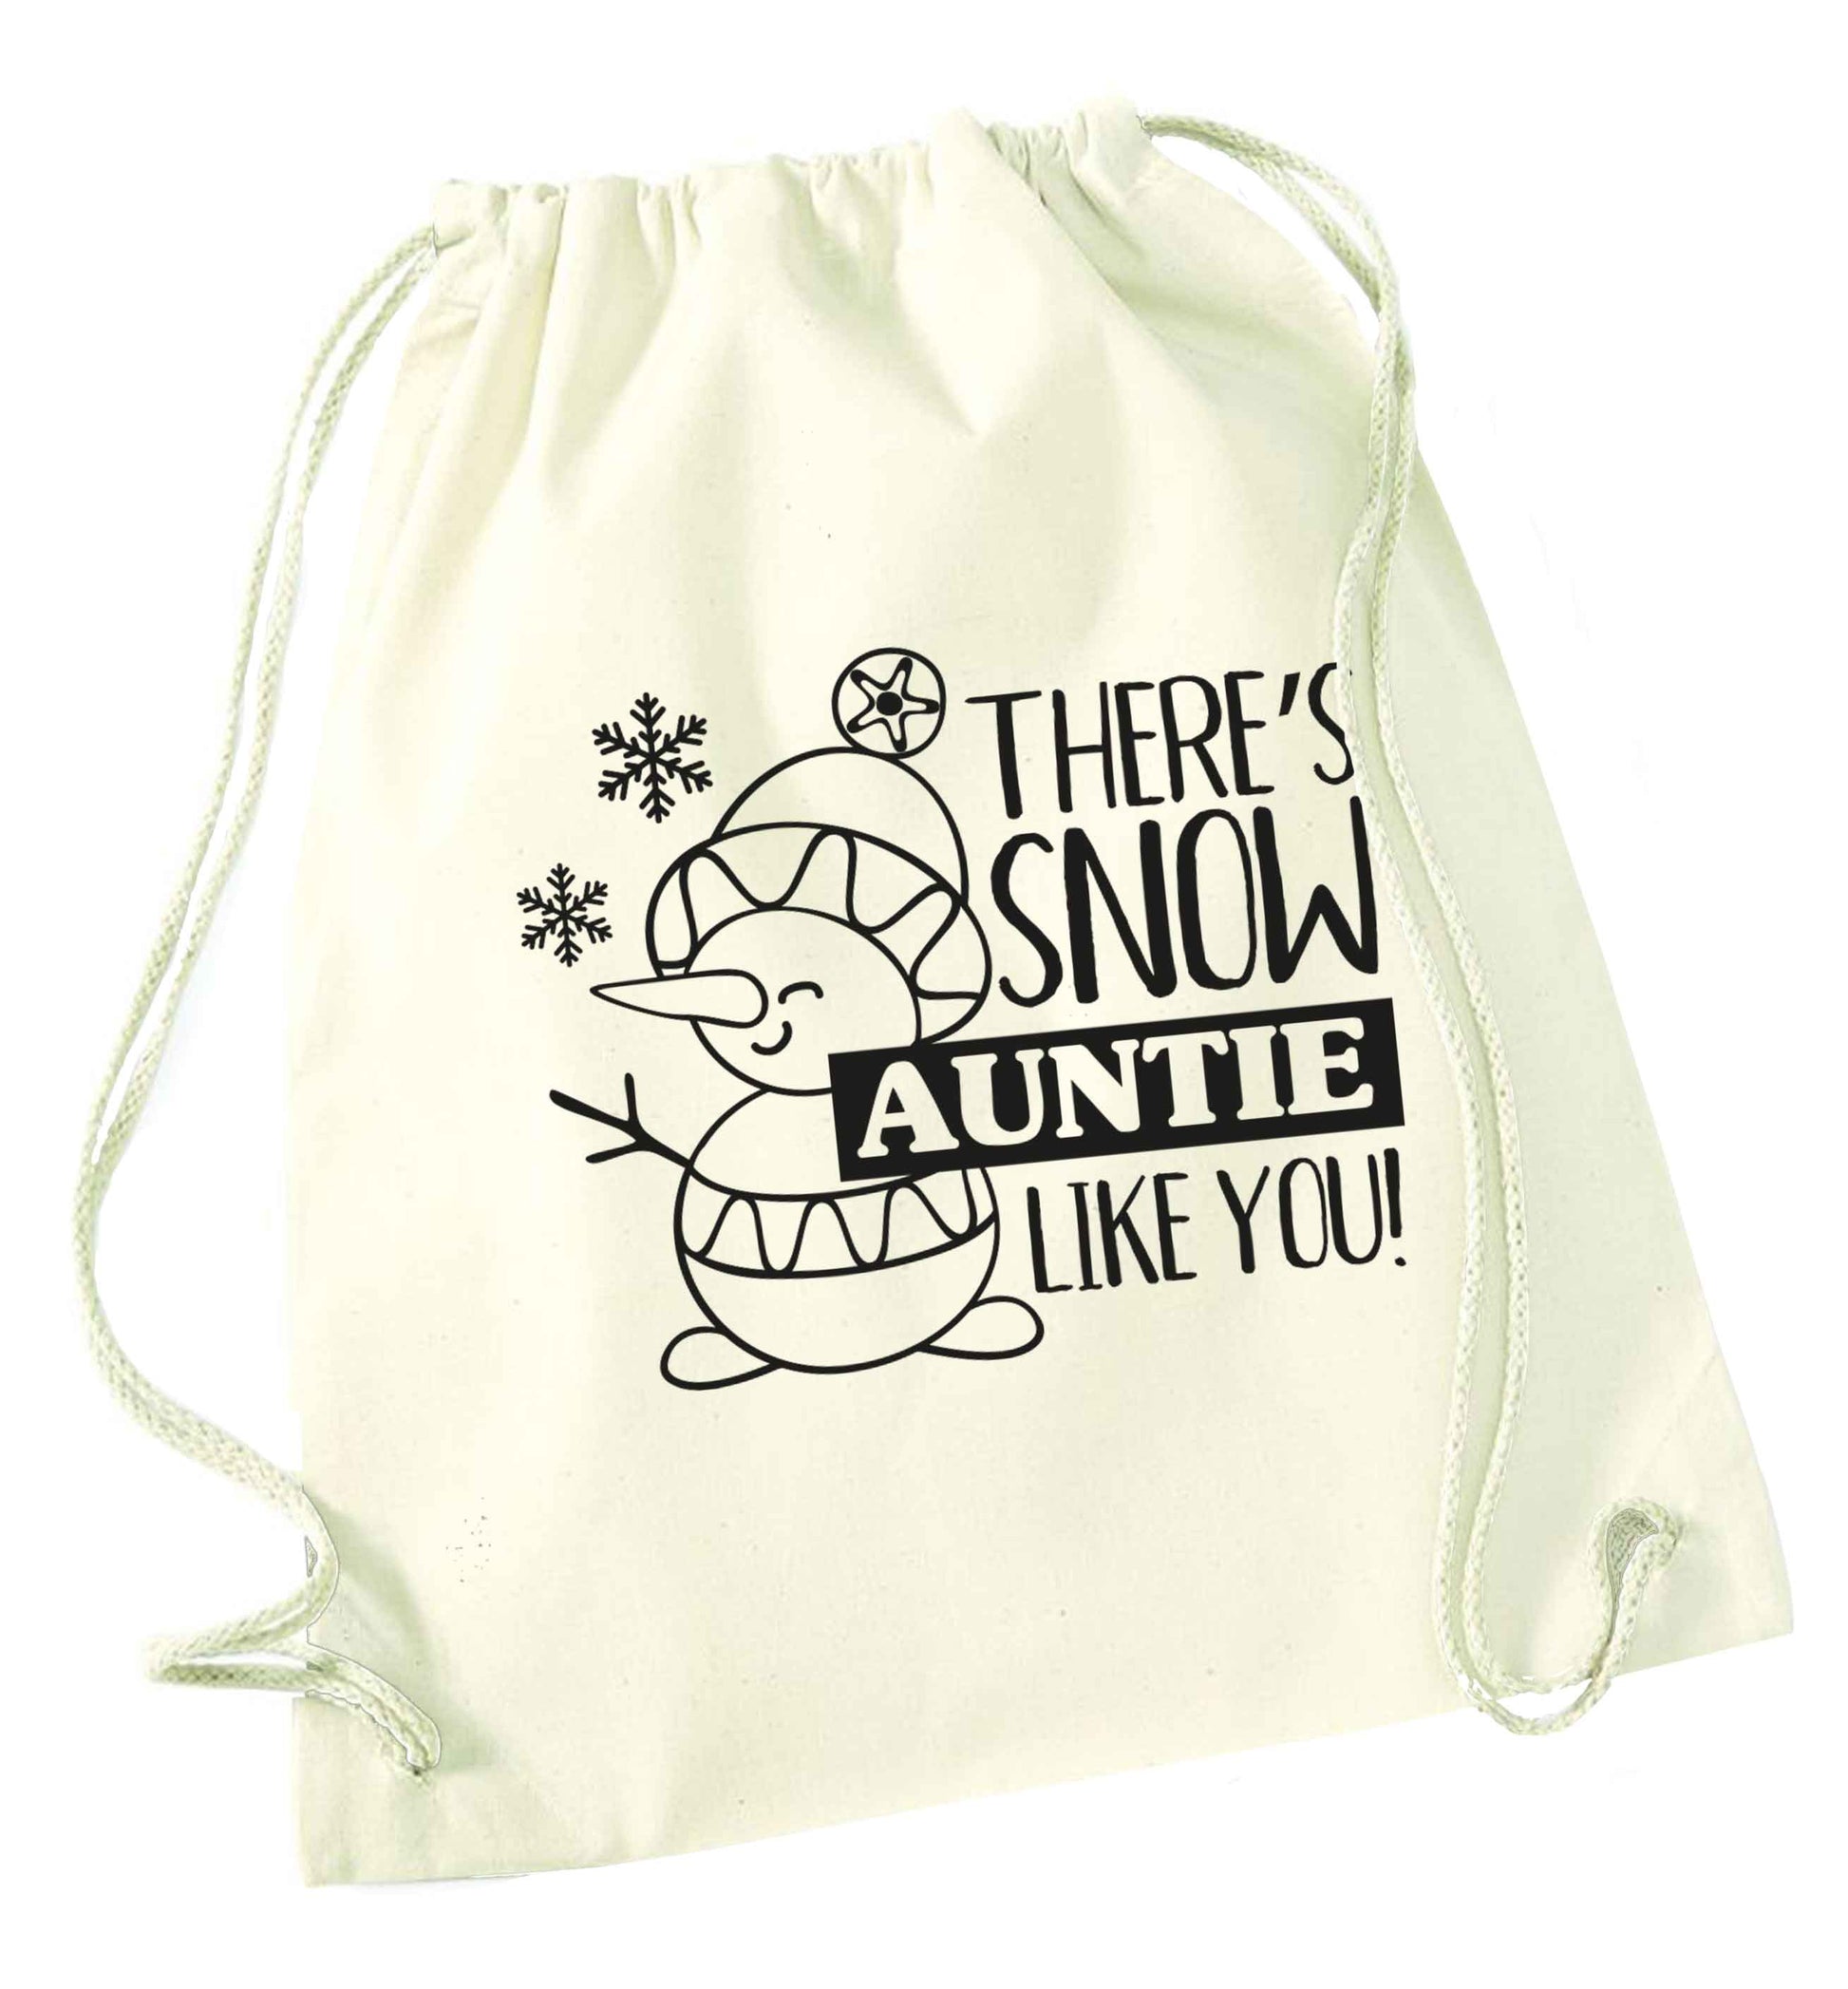 There's snow auntie like you natural drawstring bag